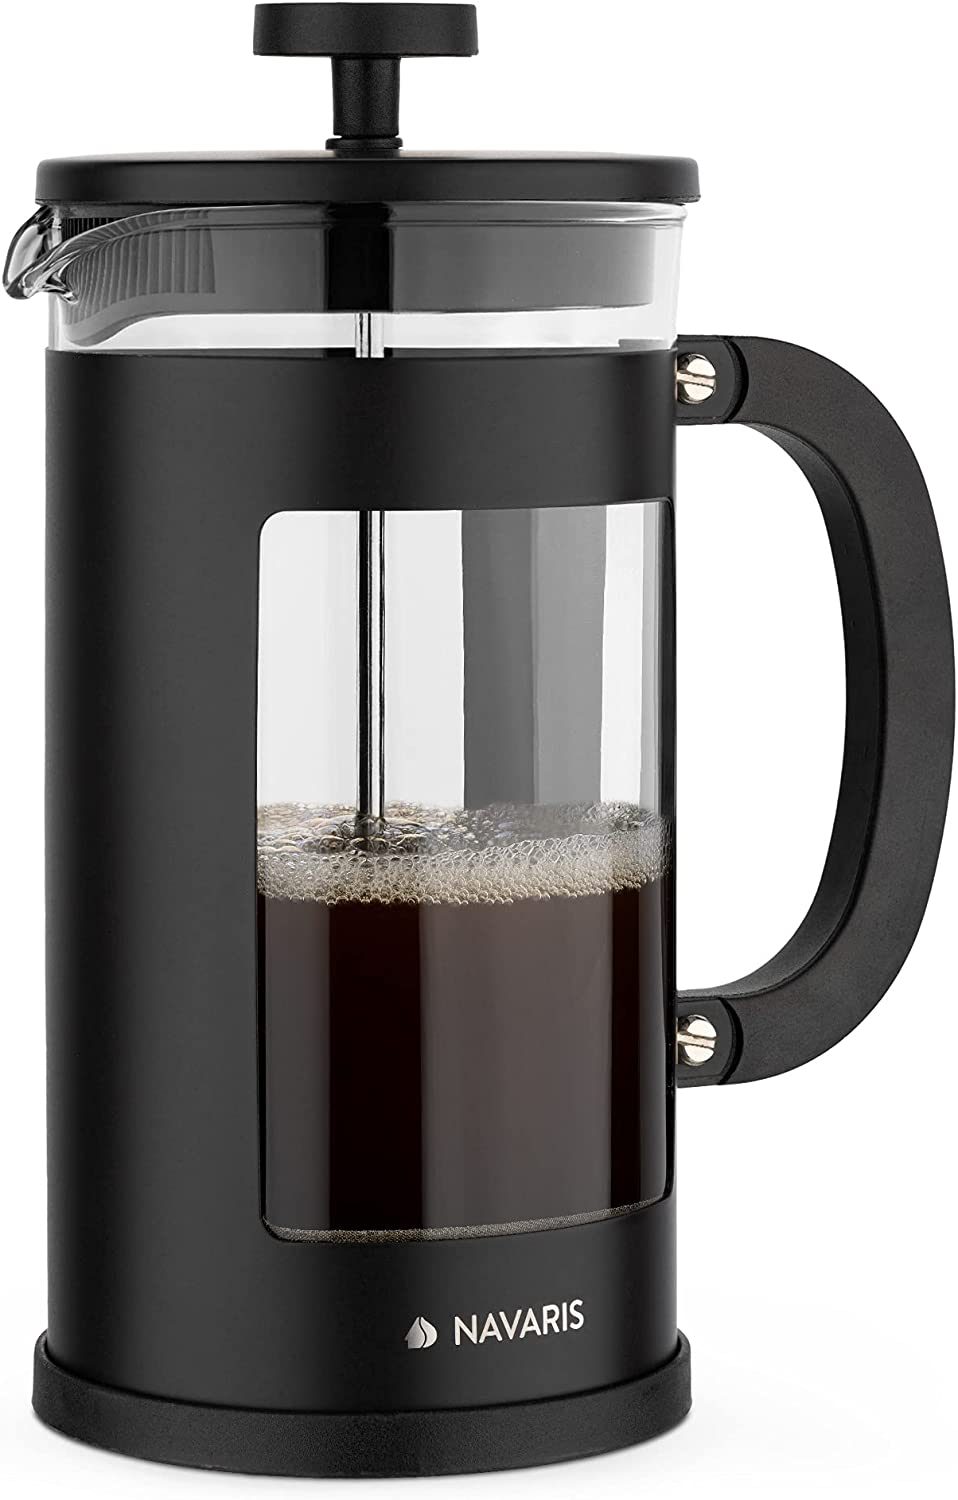 Navaris French Press Coffee Maker with Stainless Steel Filter - 1000 ml Stamp Jug - 16 x 9.6 x 21.5 cm - 1 Litre Coffee Maker Press Jug - Also for Tea